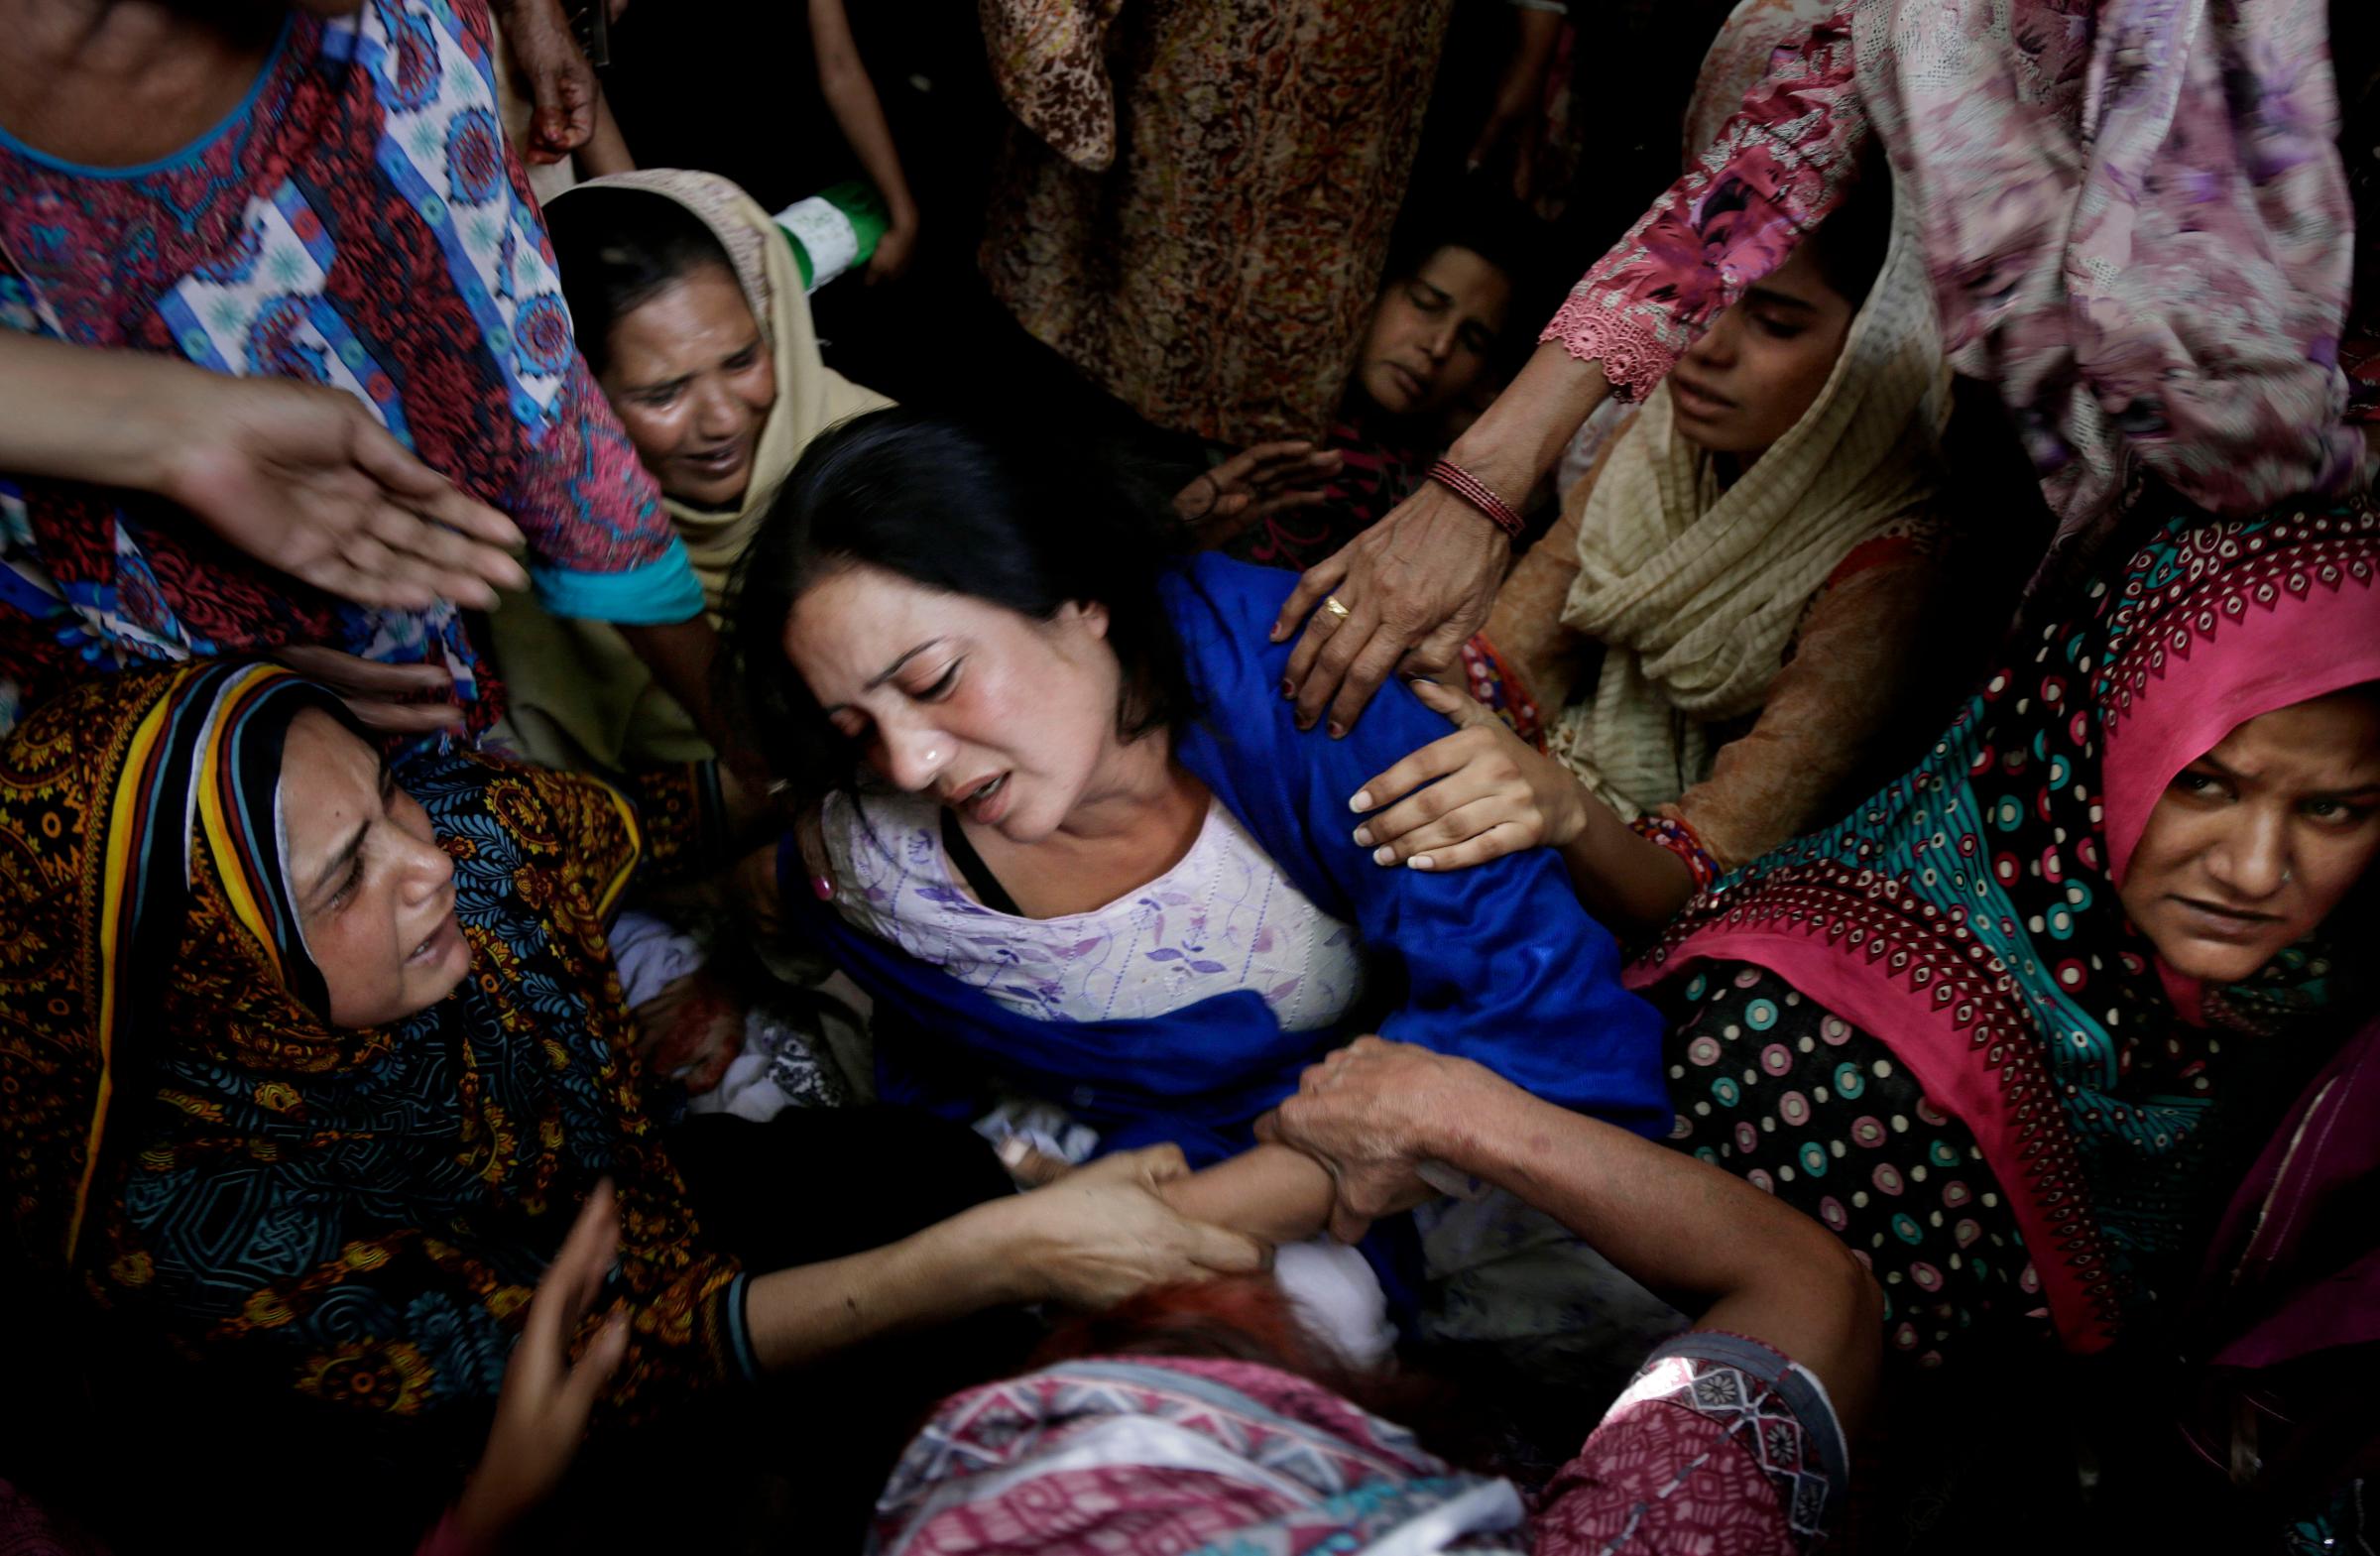 Women try to comfort a mother who lost her son in bomb attack in Lahore, Pakistan, March 28, 2016.